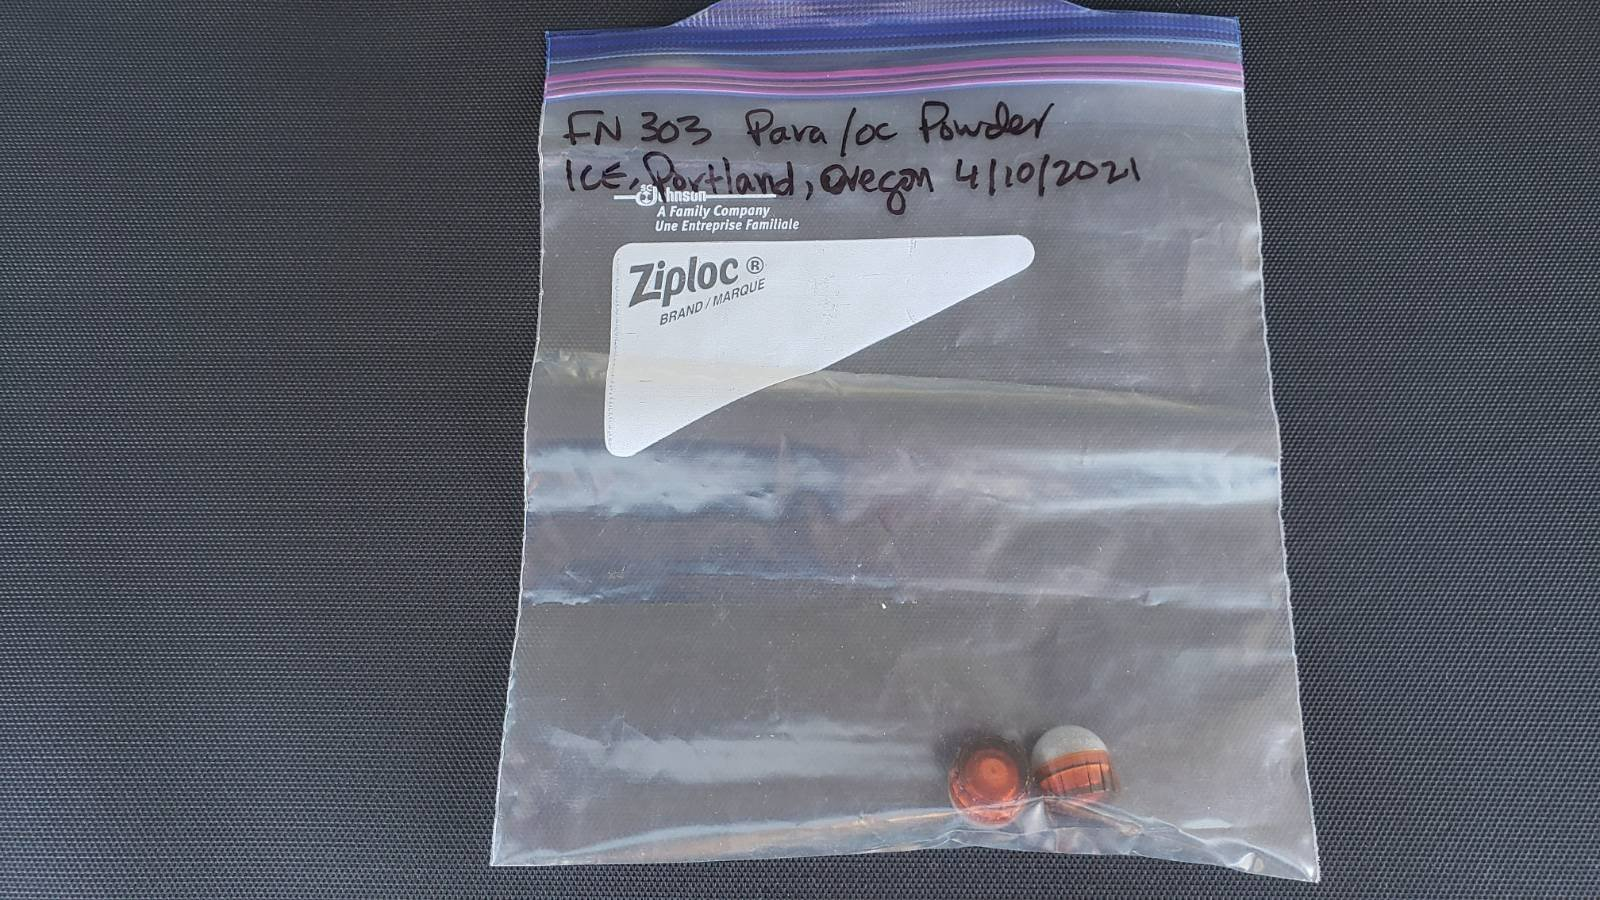 A ziploc baggie with two unexploded FN 303 PAVA/OC rounds inside. They are a dark orange color with a clear top. 

Writing, in sharpie, on the baggie identifies the munitions and says "ICE, Portland, Oregon 4/10/2021."